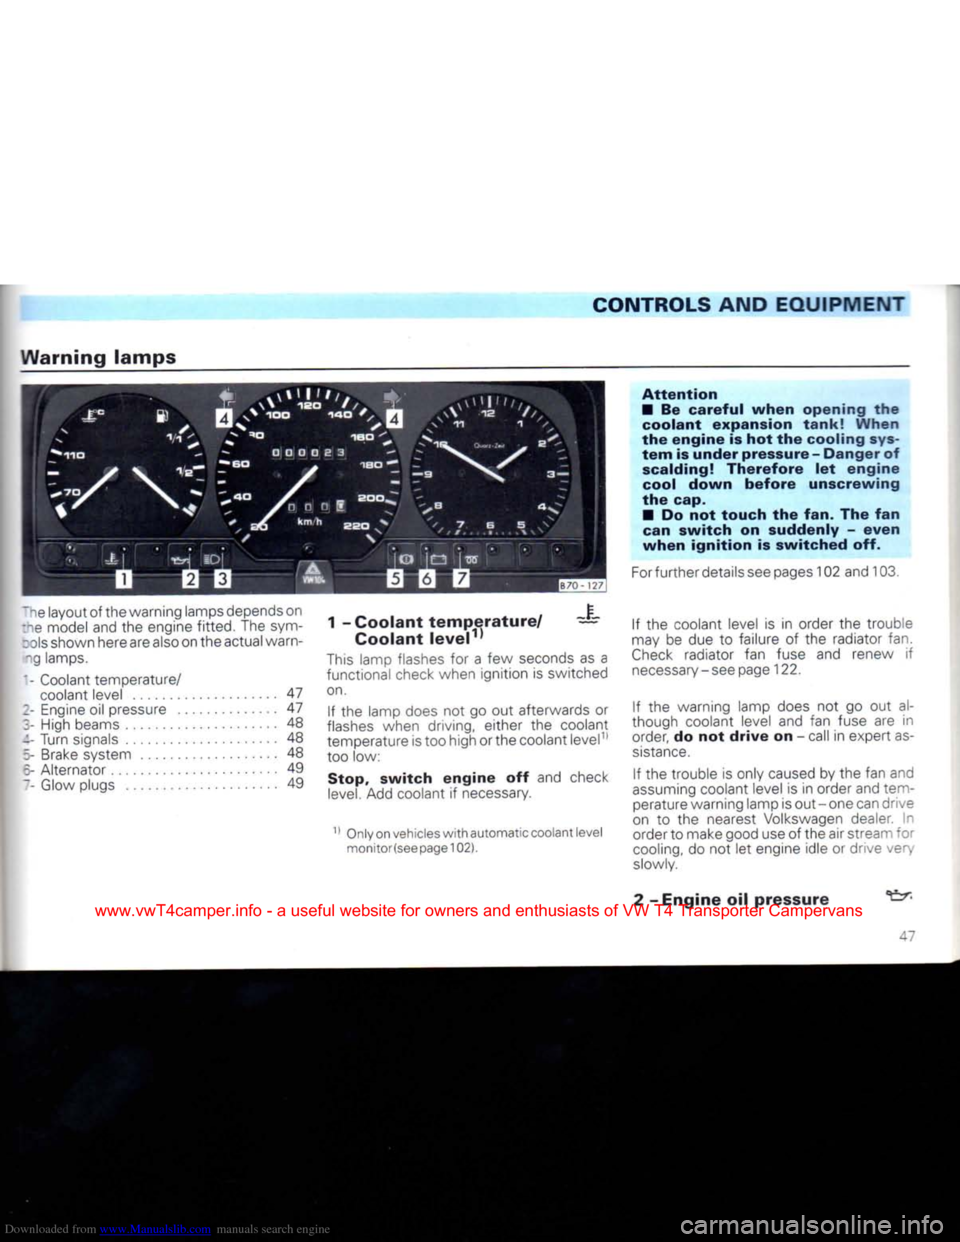 VOLKSWAGEN TRANSPORTER 1992 T4 / 4.G Owners Manual Downloaded from www.Manualslib.com manuals search engine 
CONTROLS
 AND
 EQUIPMENT 

Warning
 lamps 

~ne layout of the warning lamps depends on 
:ne model and the engine fitted. The sym-
: ols shown 